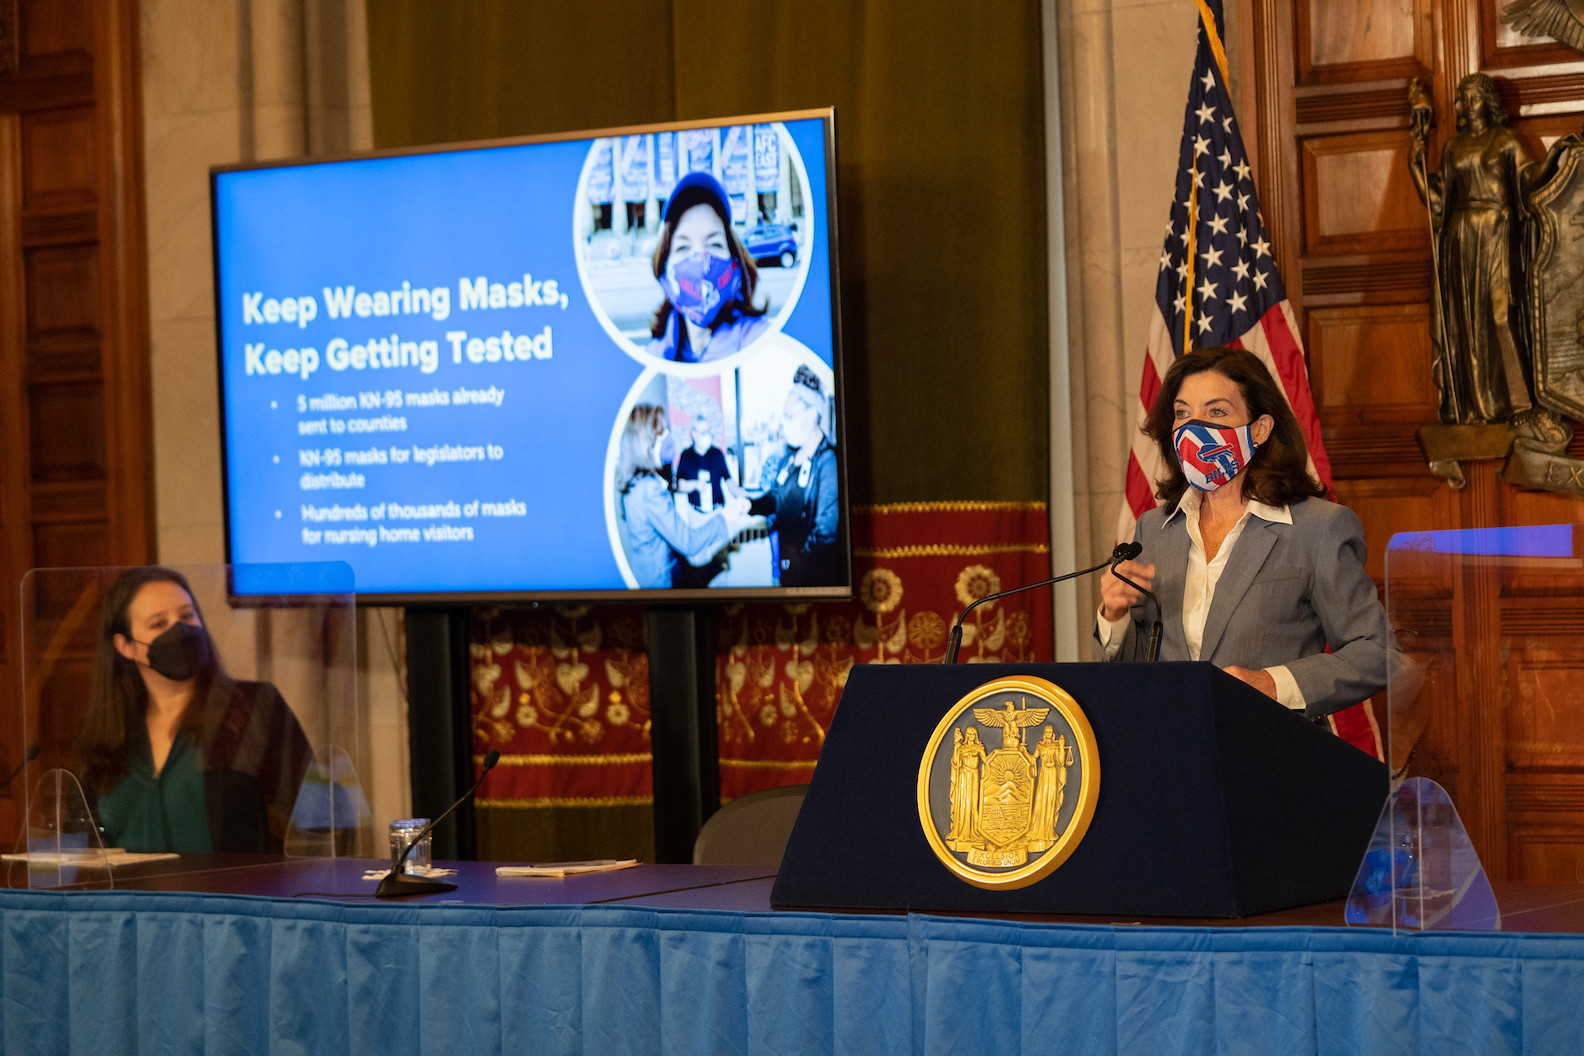 Gov. Kathy Hochul on Friday announced `Winter Surge Plan 2.0,` a new targeted effort to bolster New York's fight against the winter surge. Her plan focuses on five areas: keeping students in school, doubling down on masks and testing, preventing severe illness and death, increasing access to vaccines and boosters, and working together with local leaders. (Photo by Don Pollard/Office of Gov. Kathy Hochul)